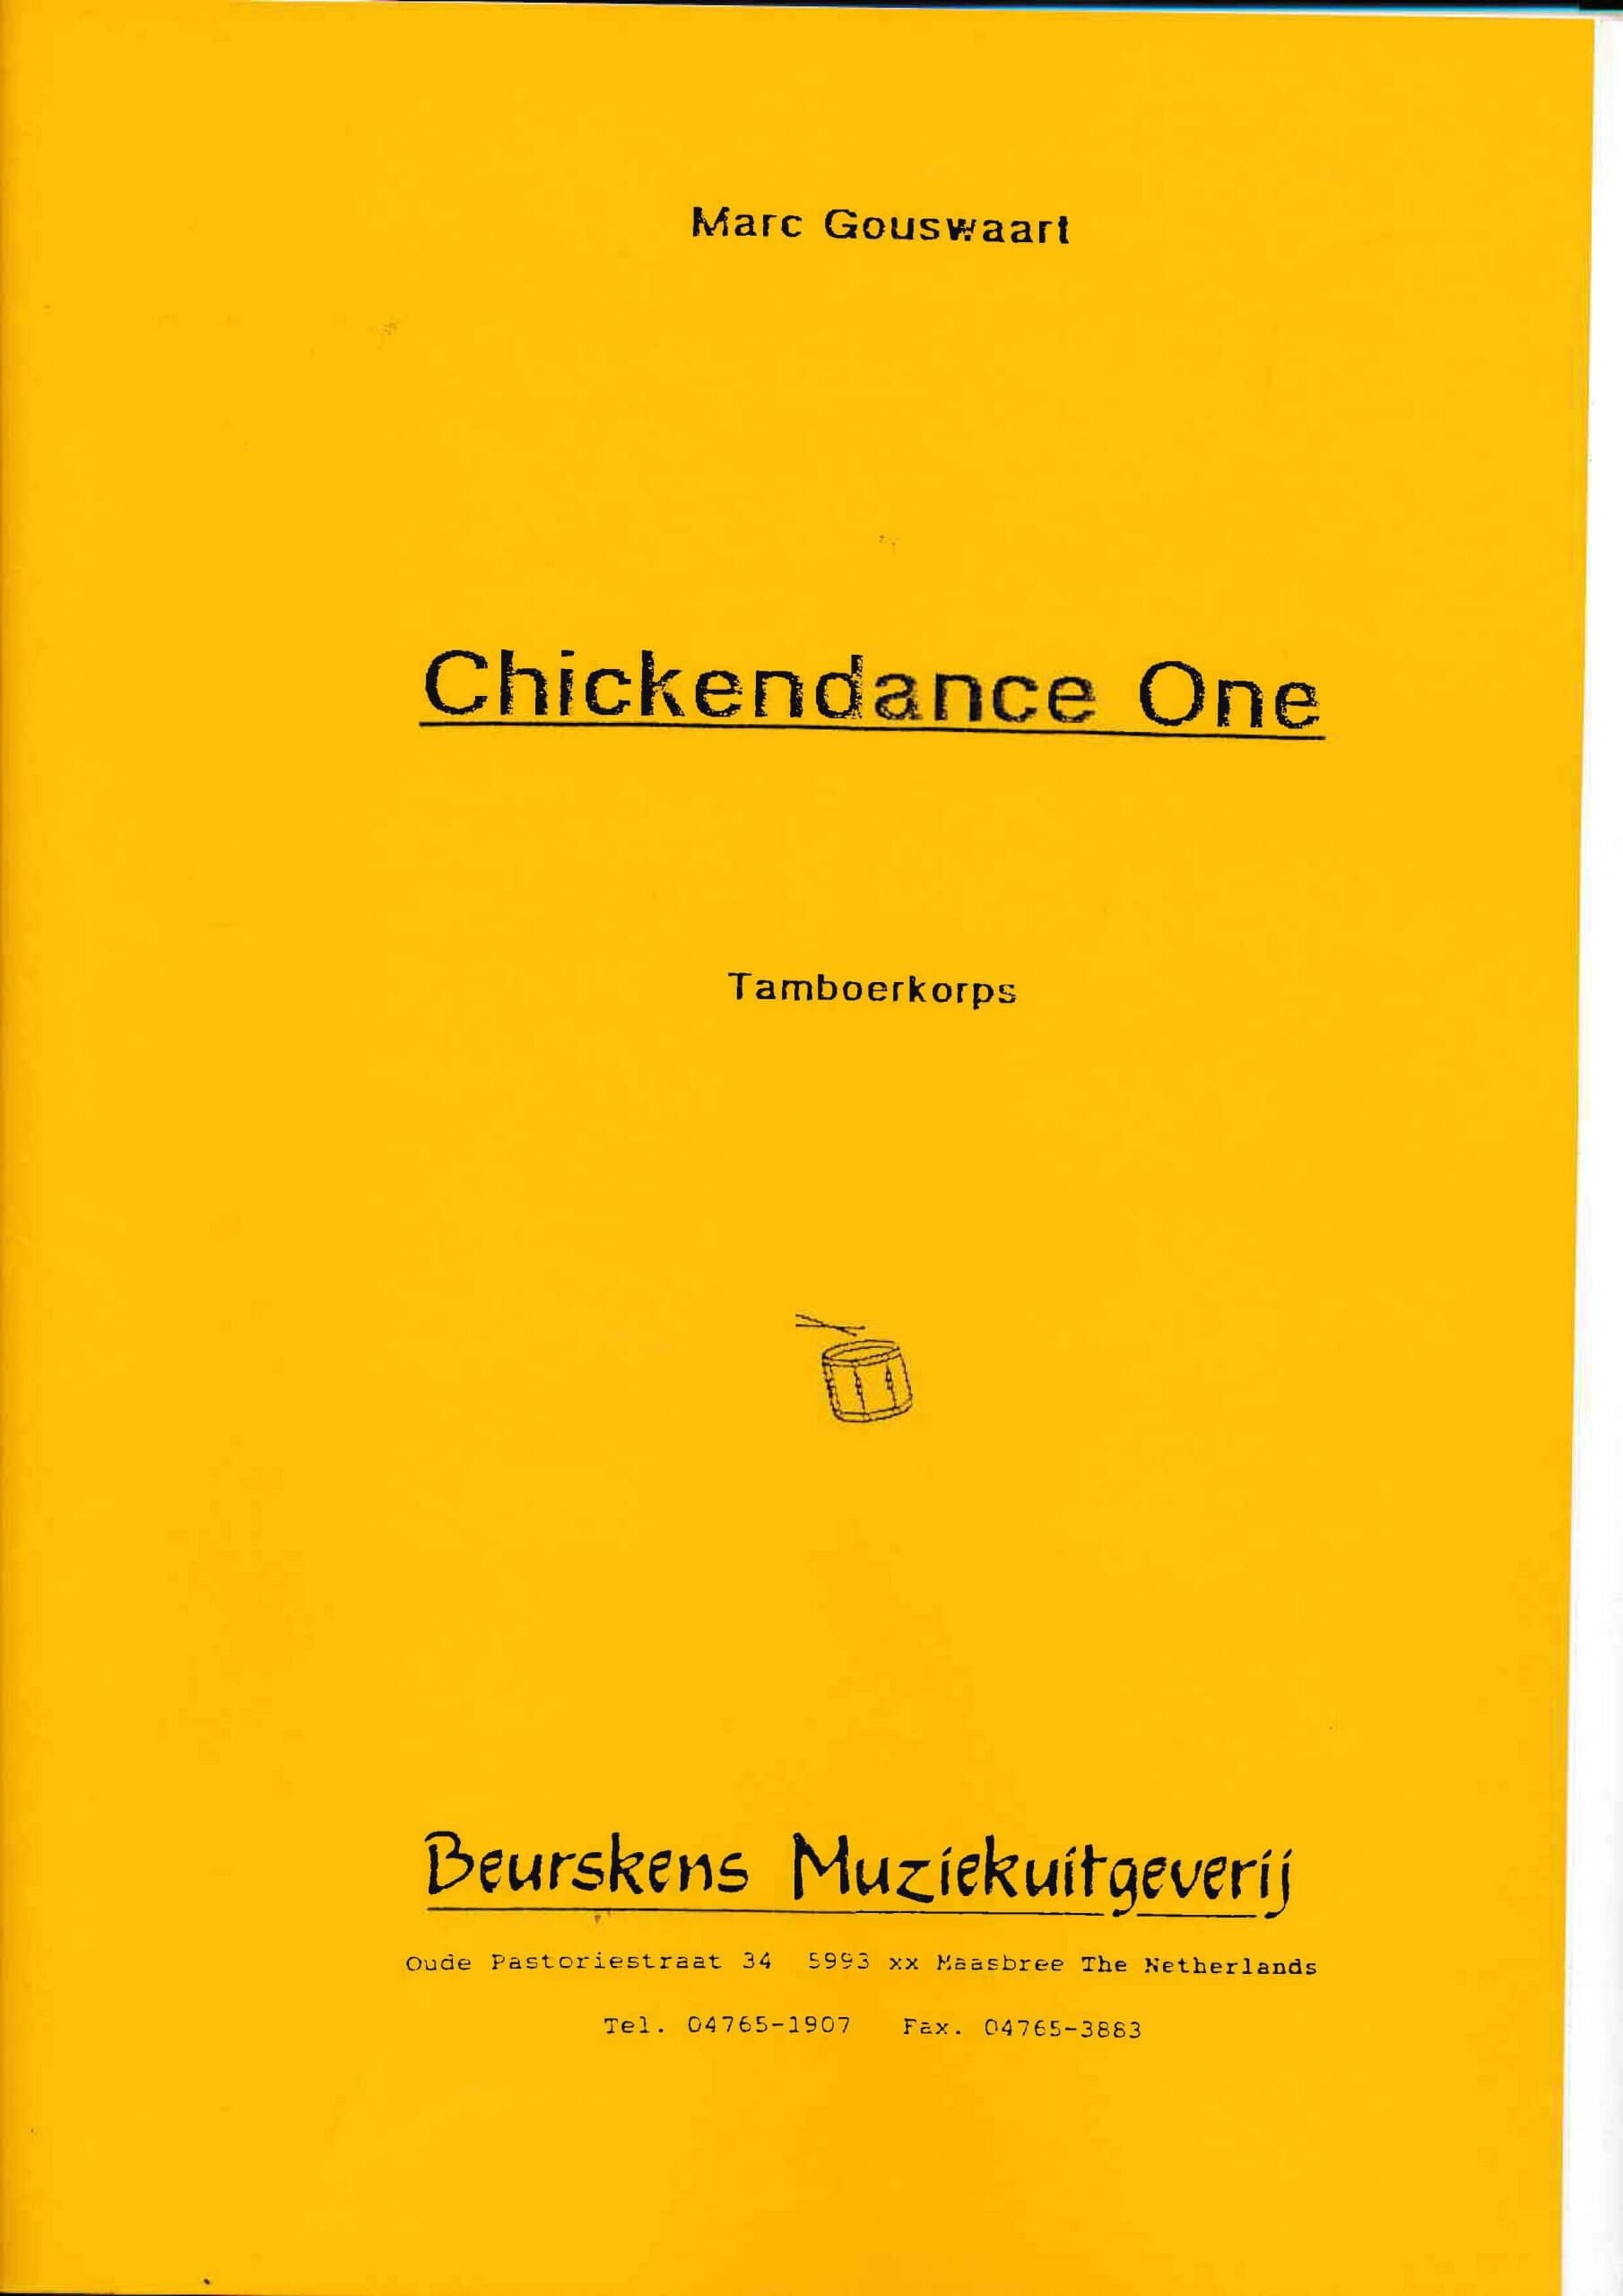 Chickendance One by Marc Gouswaart